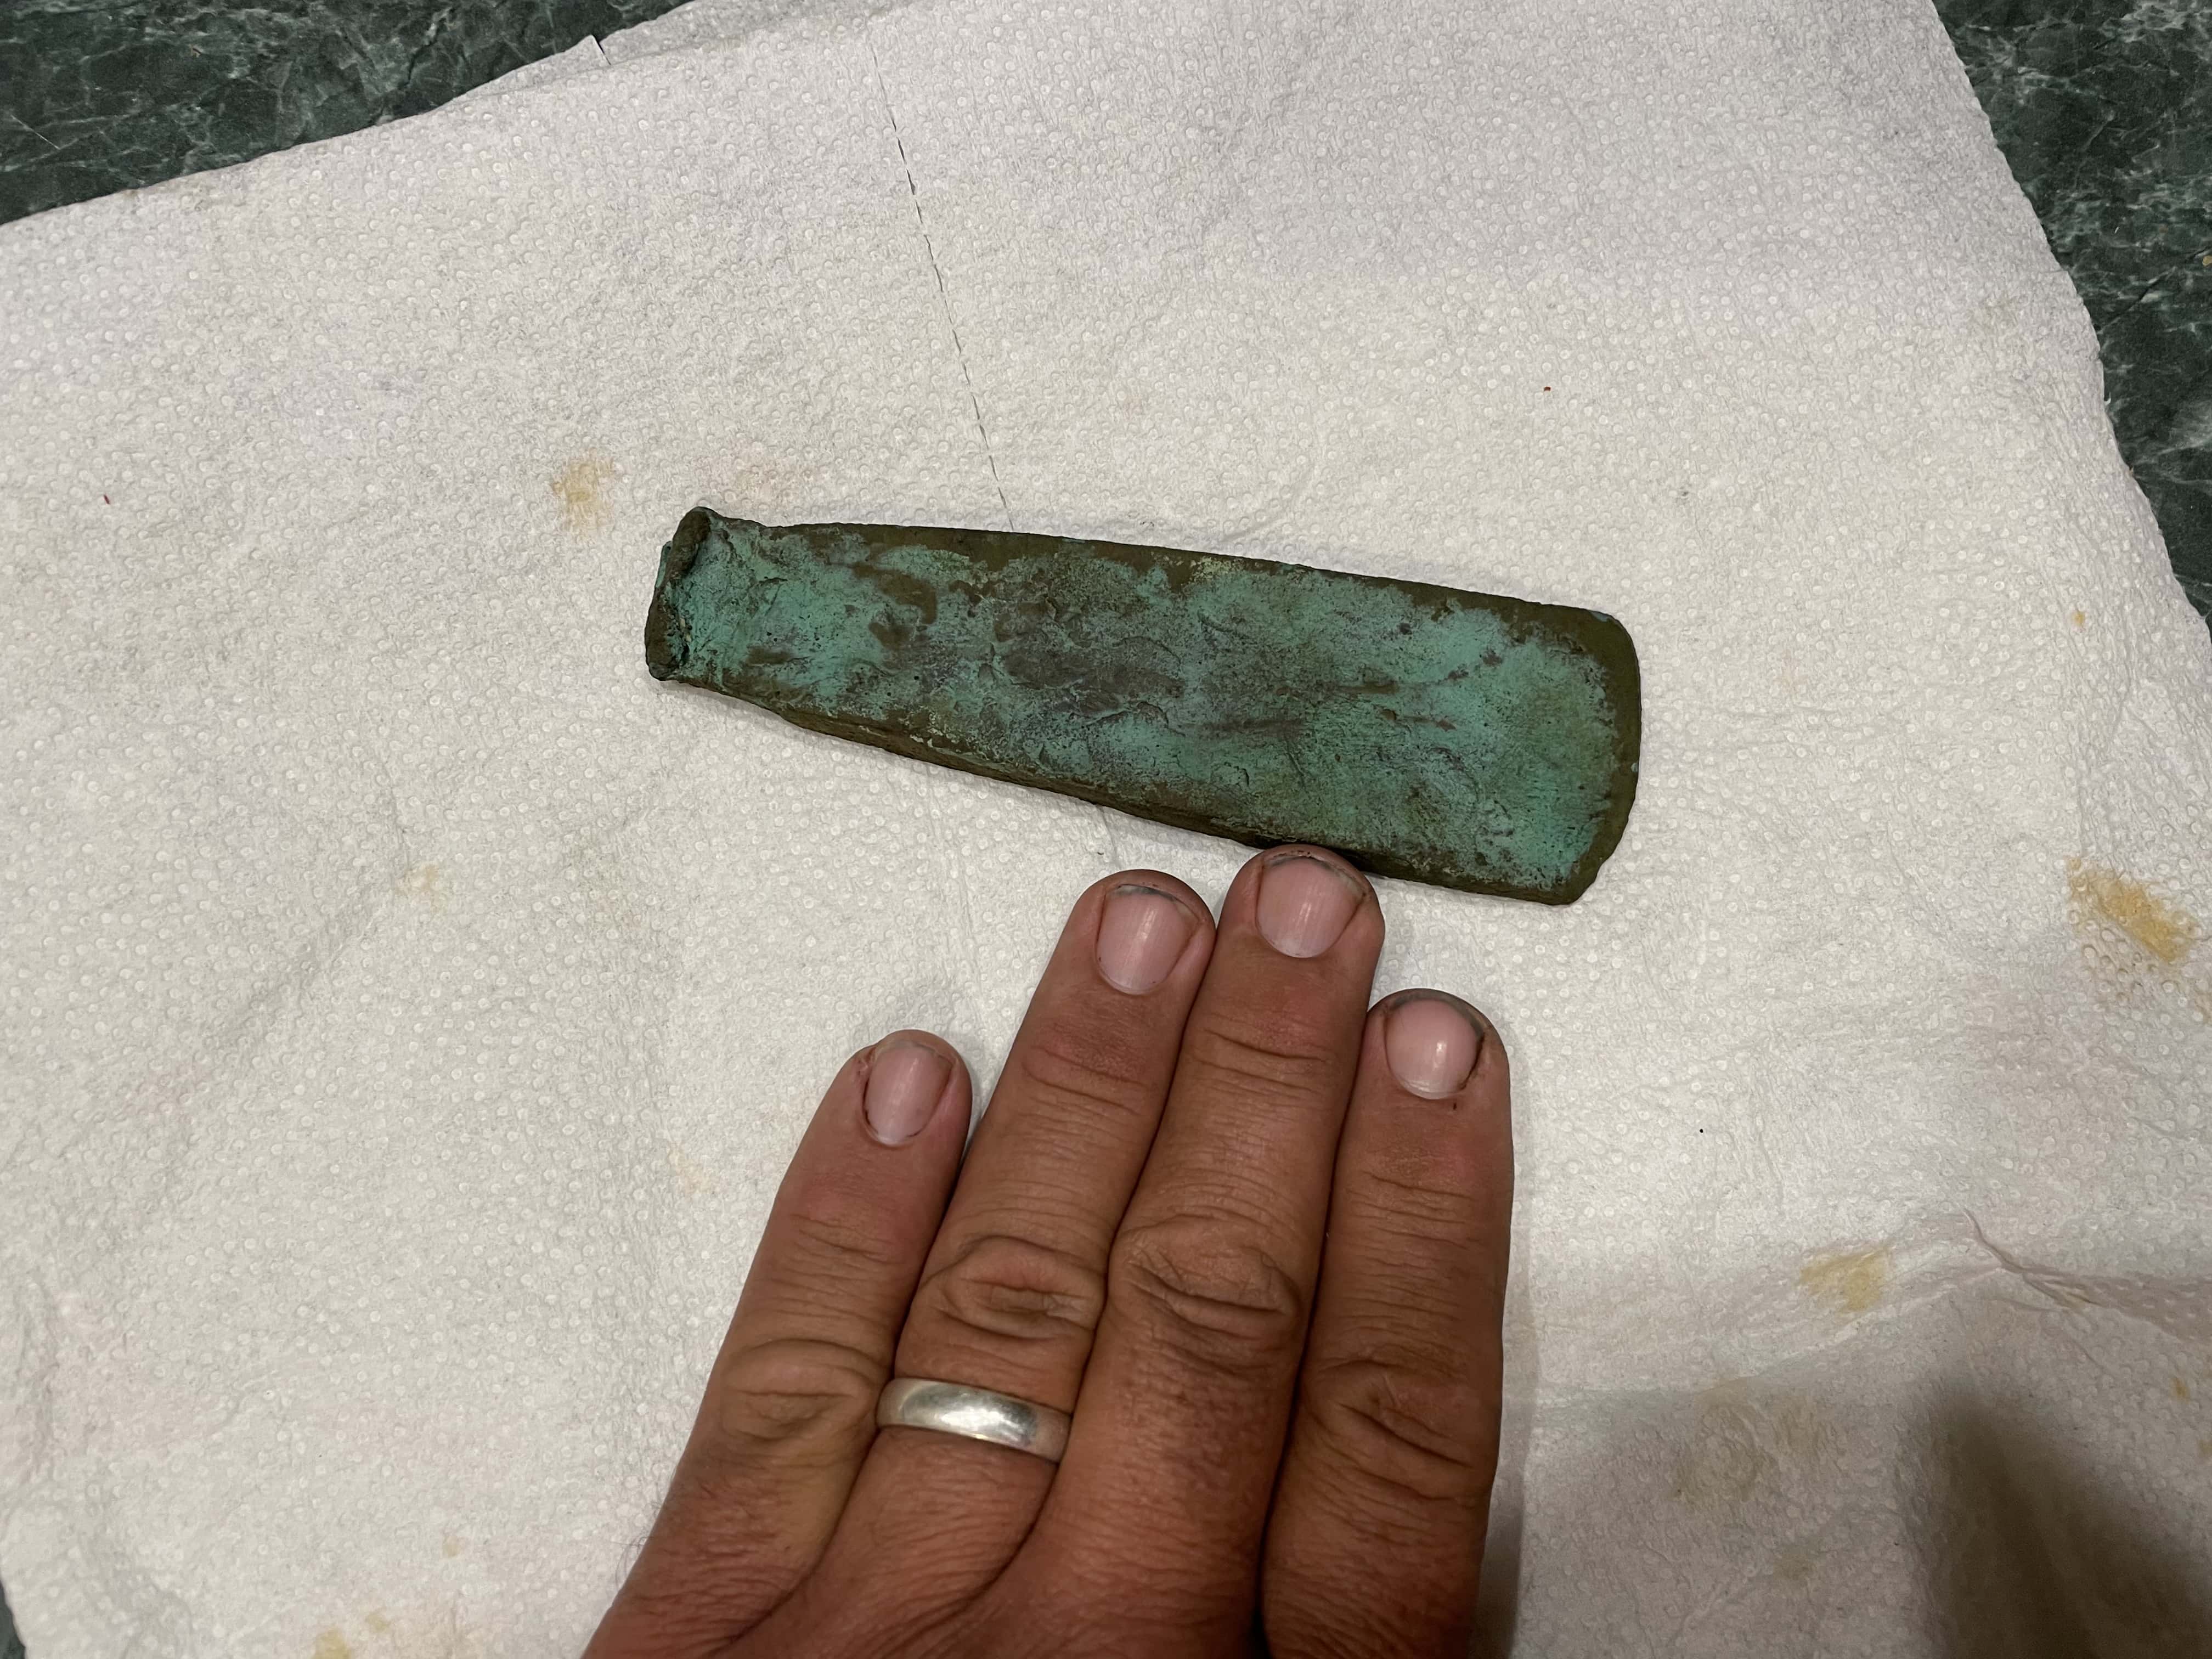 Prehistoric Copper Implement with Green Patina Across Surface Sat on Paper Towel with Hand Laid Flat Beneath it to Show the Size